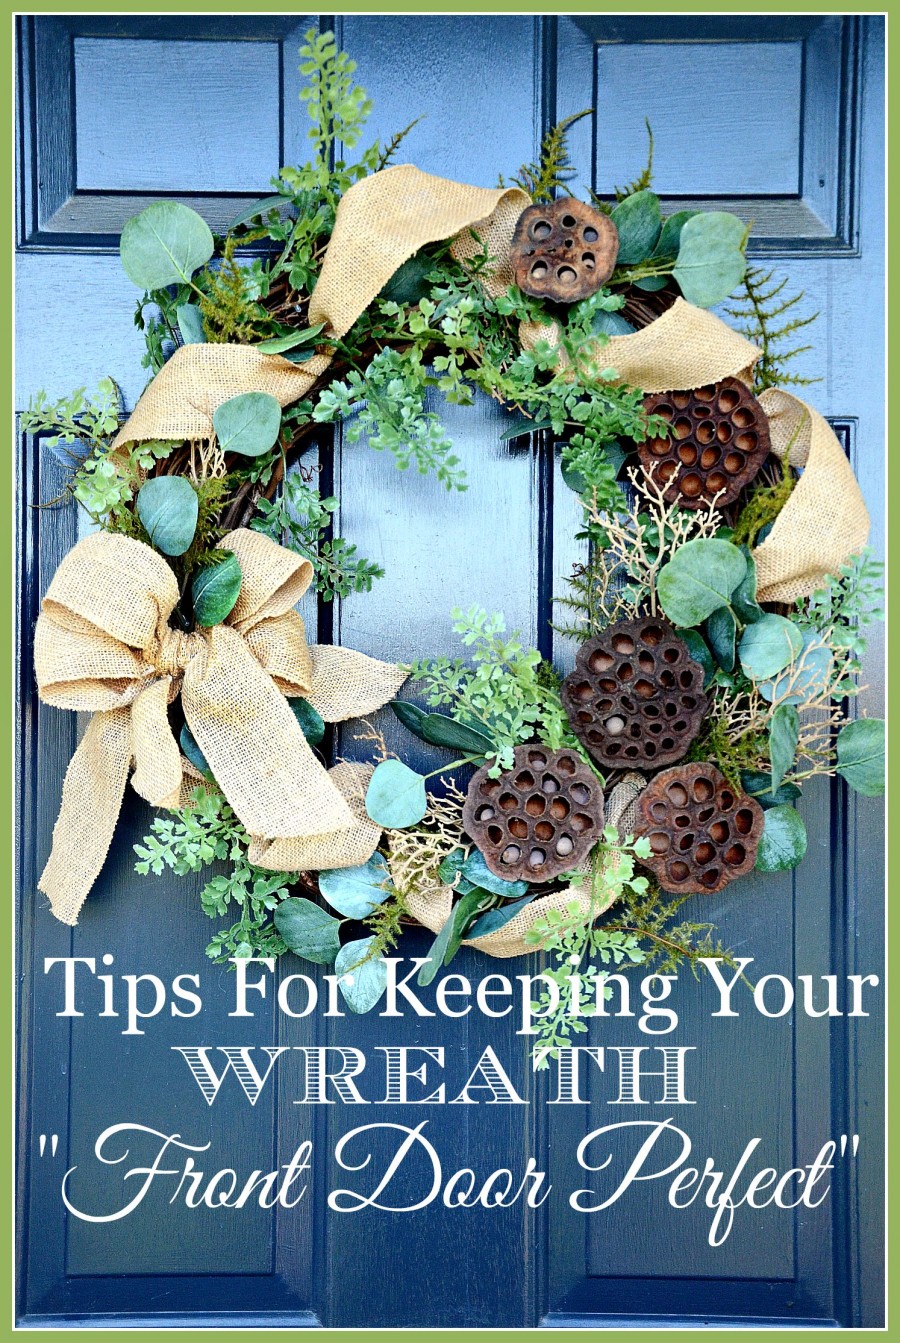 TIPS FOR KEEPING YOUR WREATH “FRONT DOOR PERFECT” and A GORGEOUS WREATH GIVEAWAY!